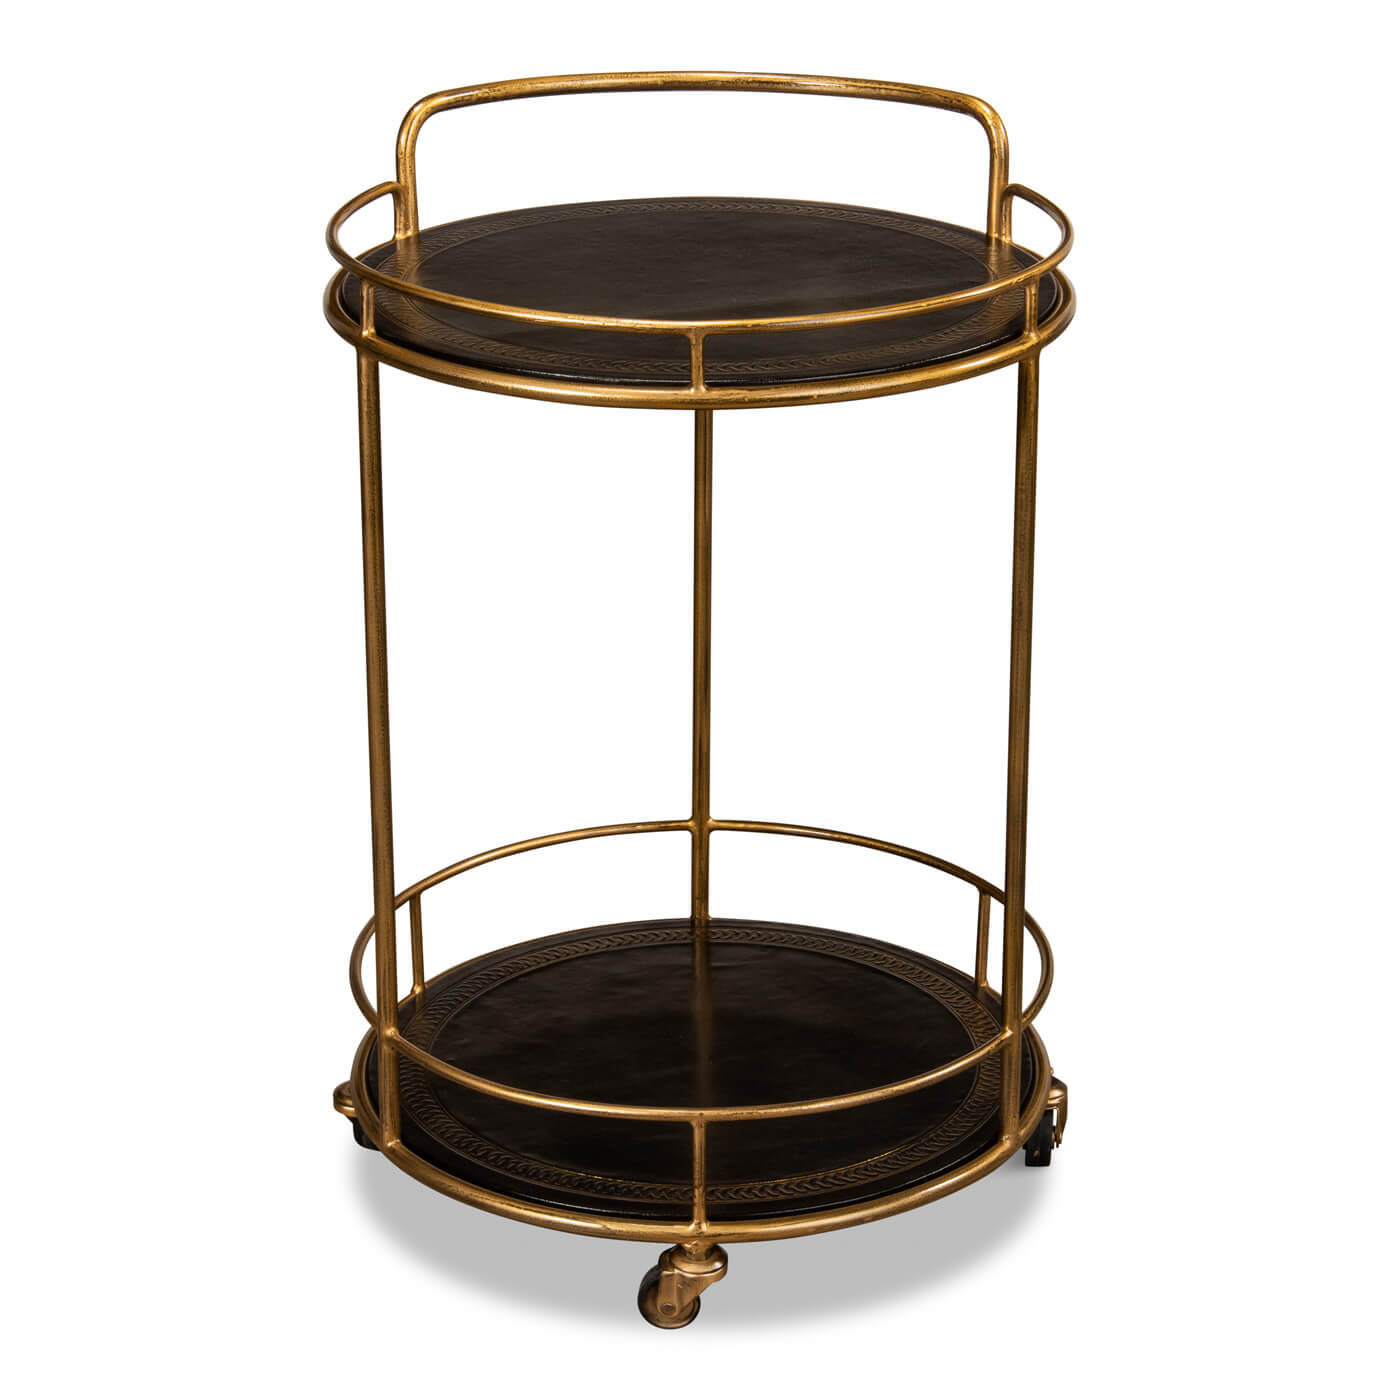 Modern Iron and Leather Serving Side Table Cart - English Georgian America